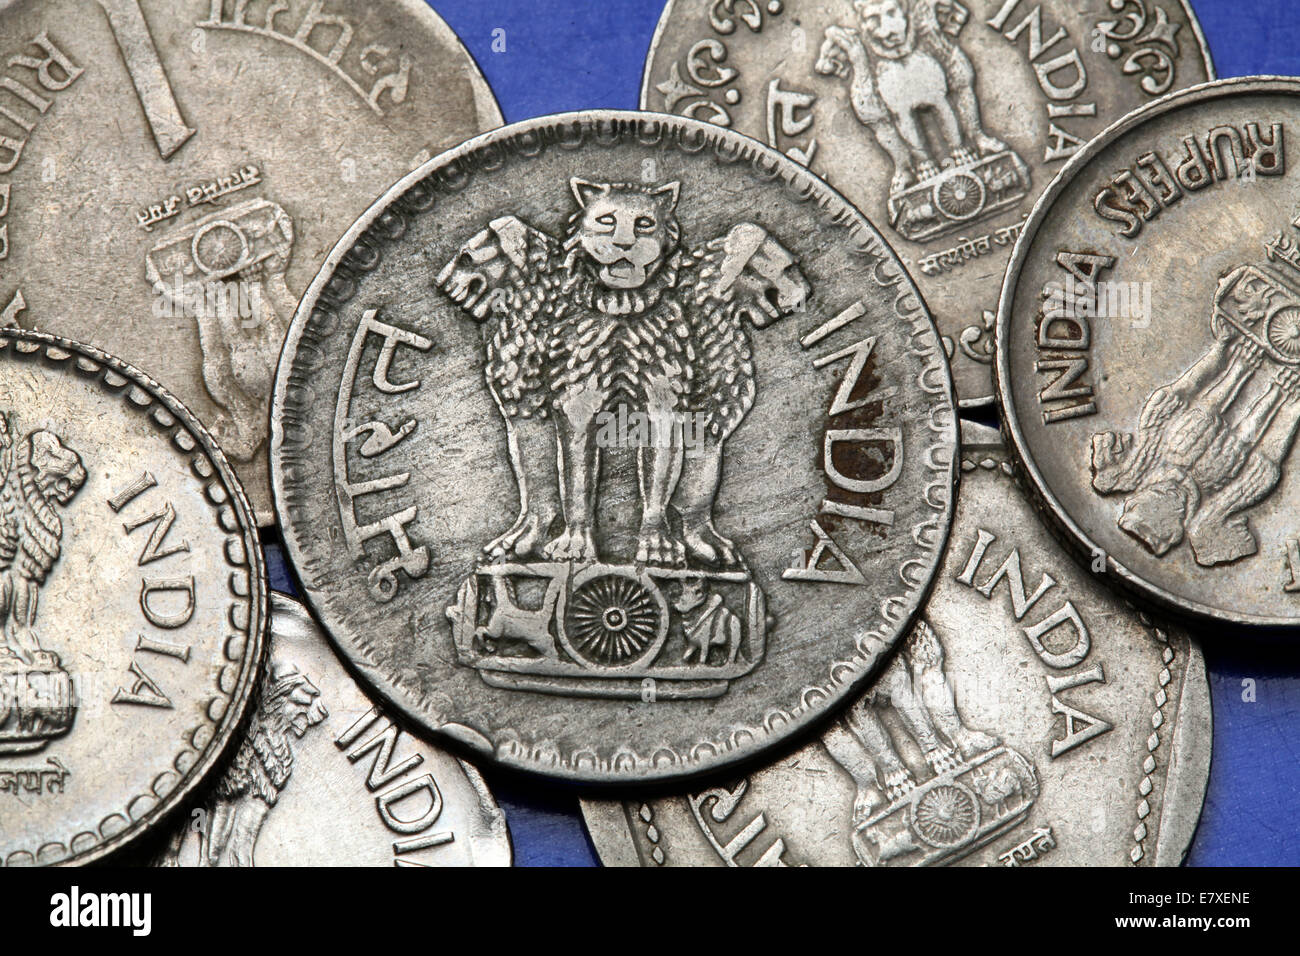 Coins of India. The Sarnath Lion Capital of Ashoka served as the state emblem of India depicted in the Indian one rupee coin. Stock Photo